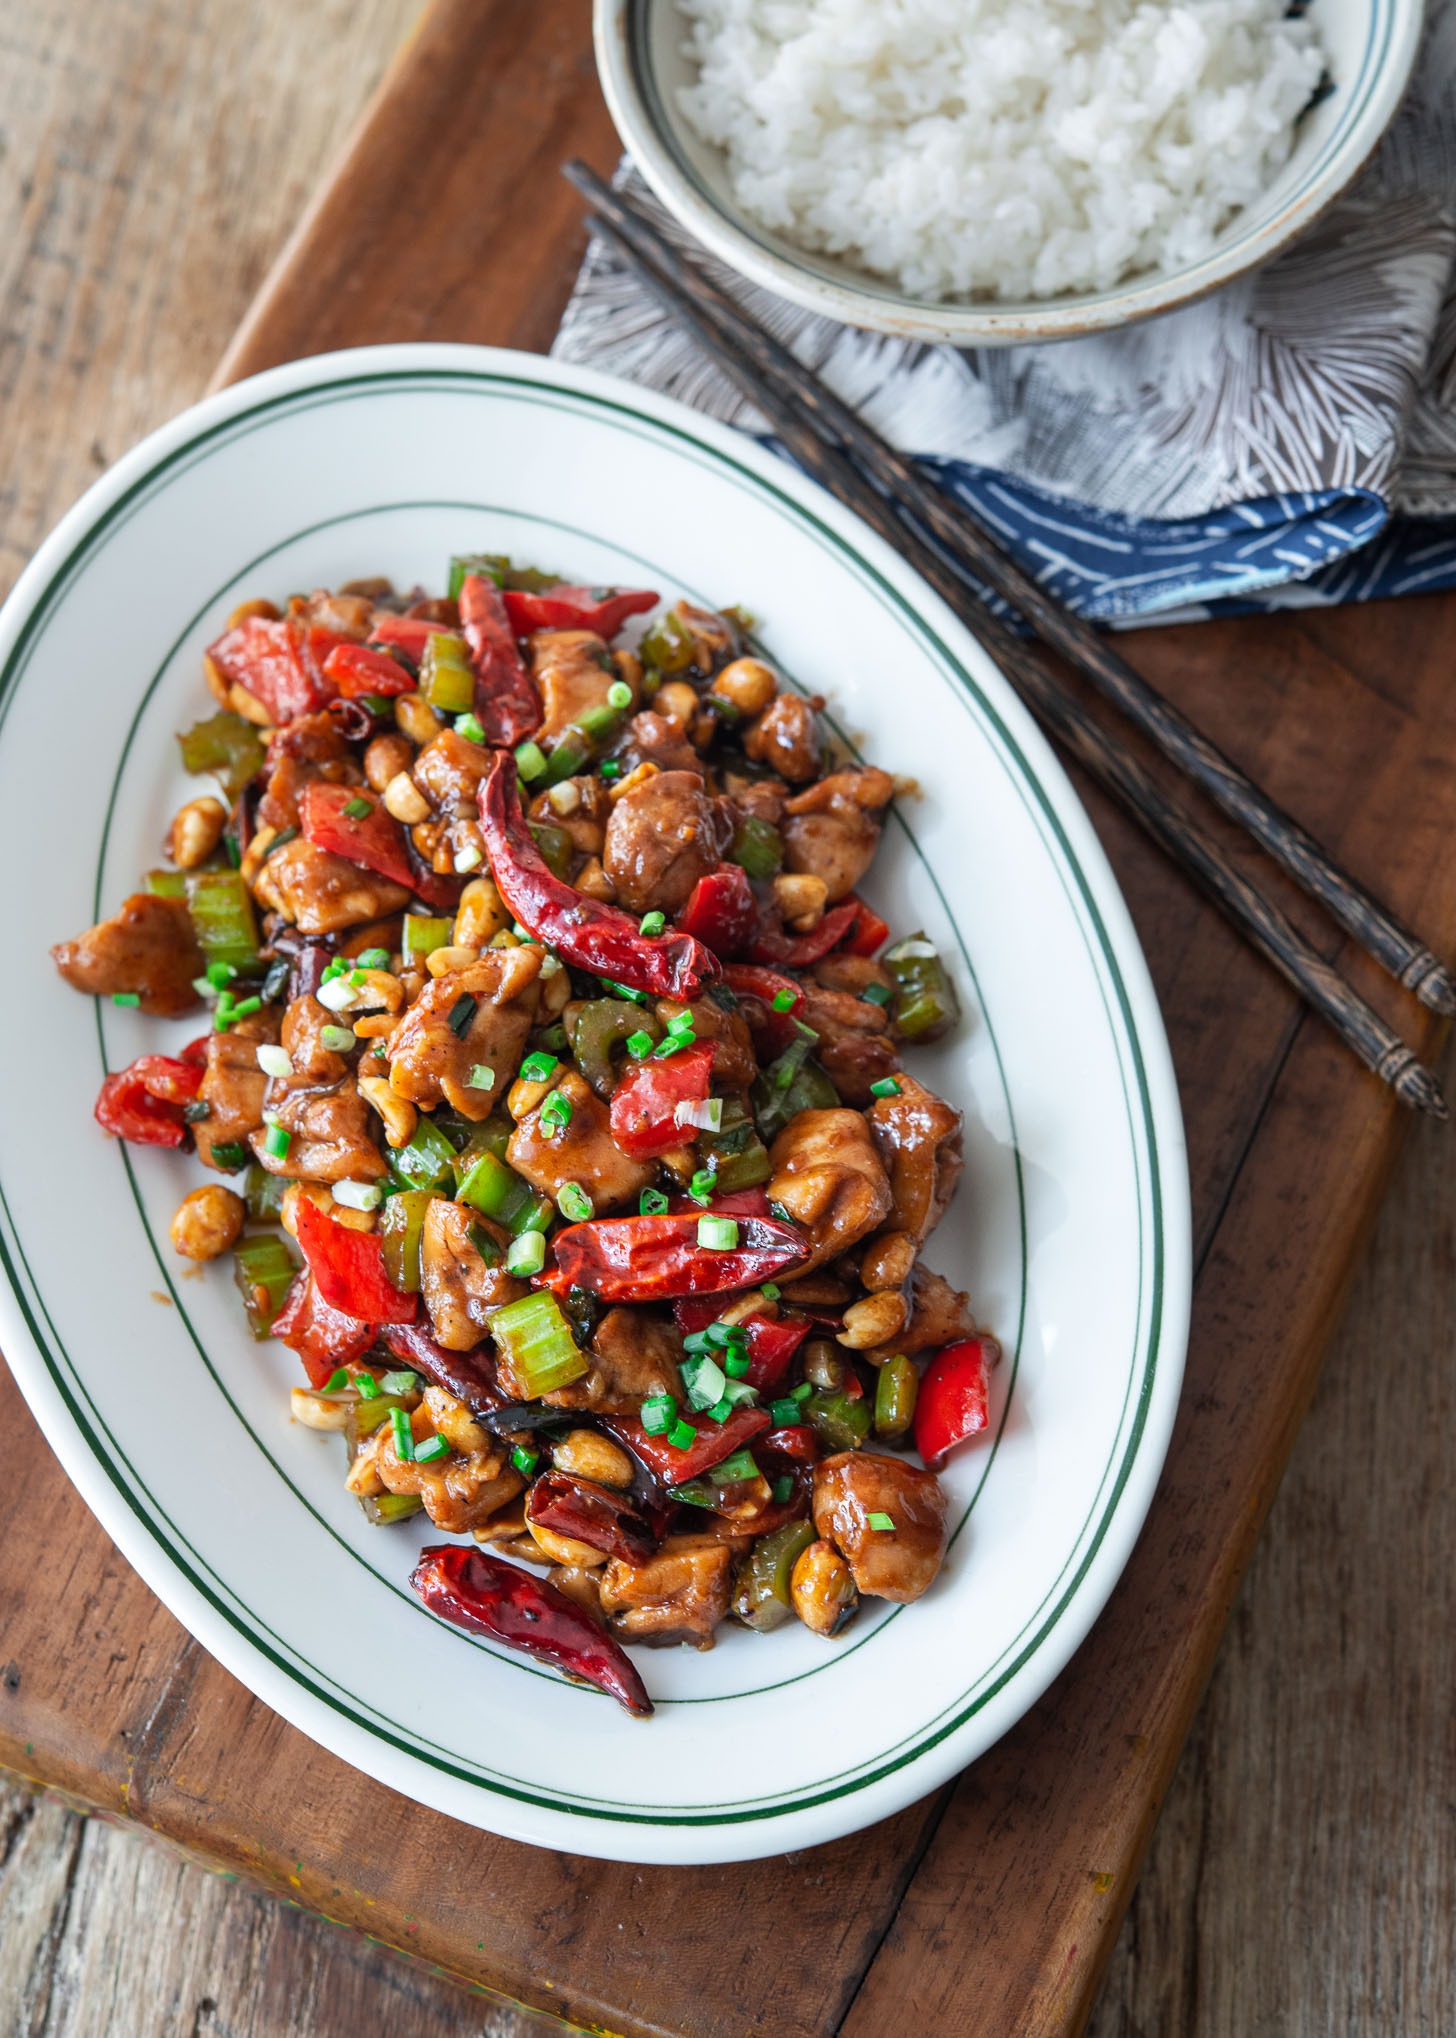 Sichuan Kung pao chicken served on a platter with a bowl of rice.